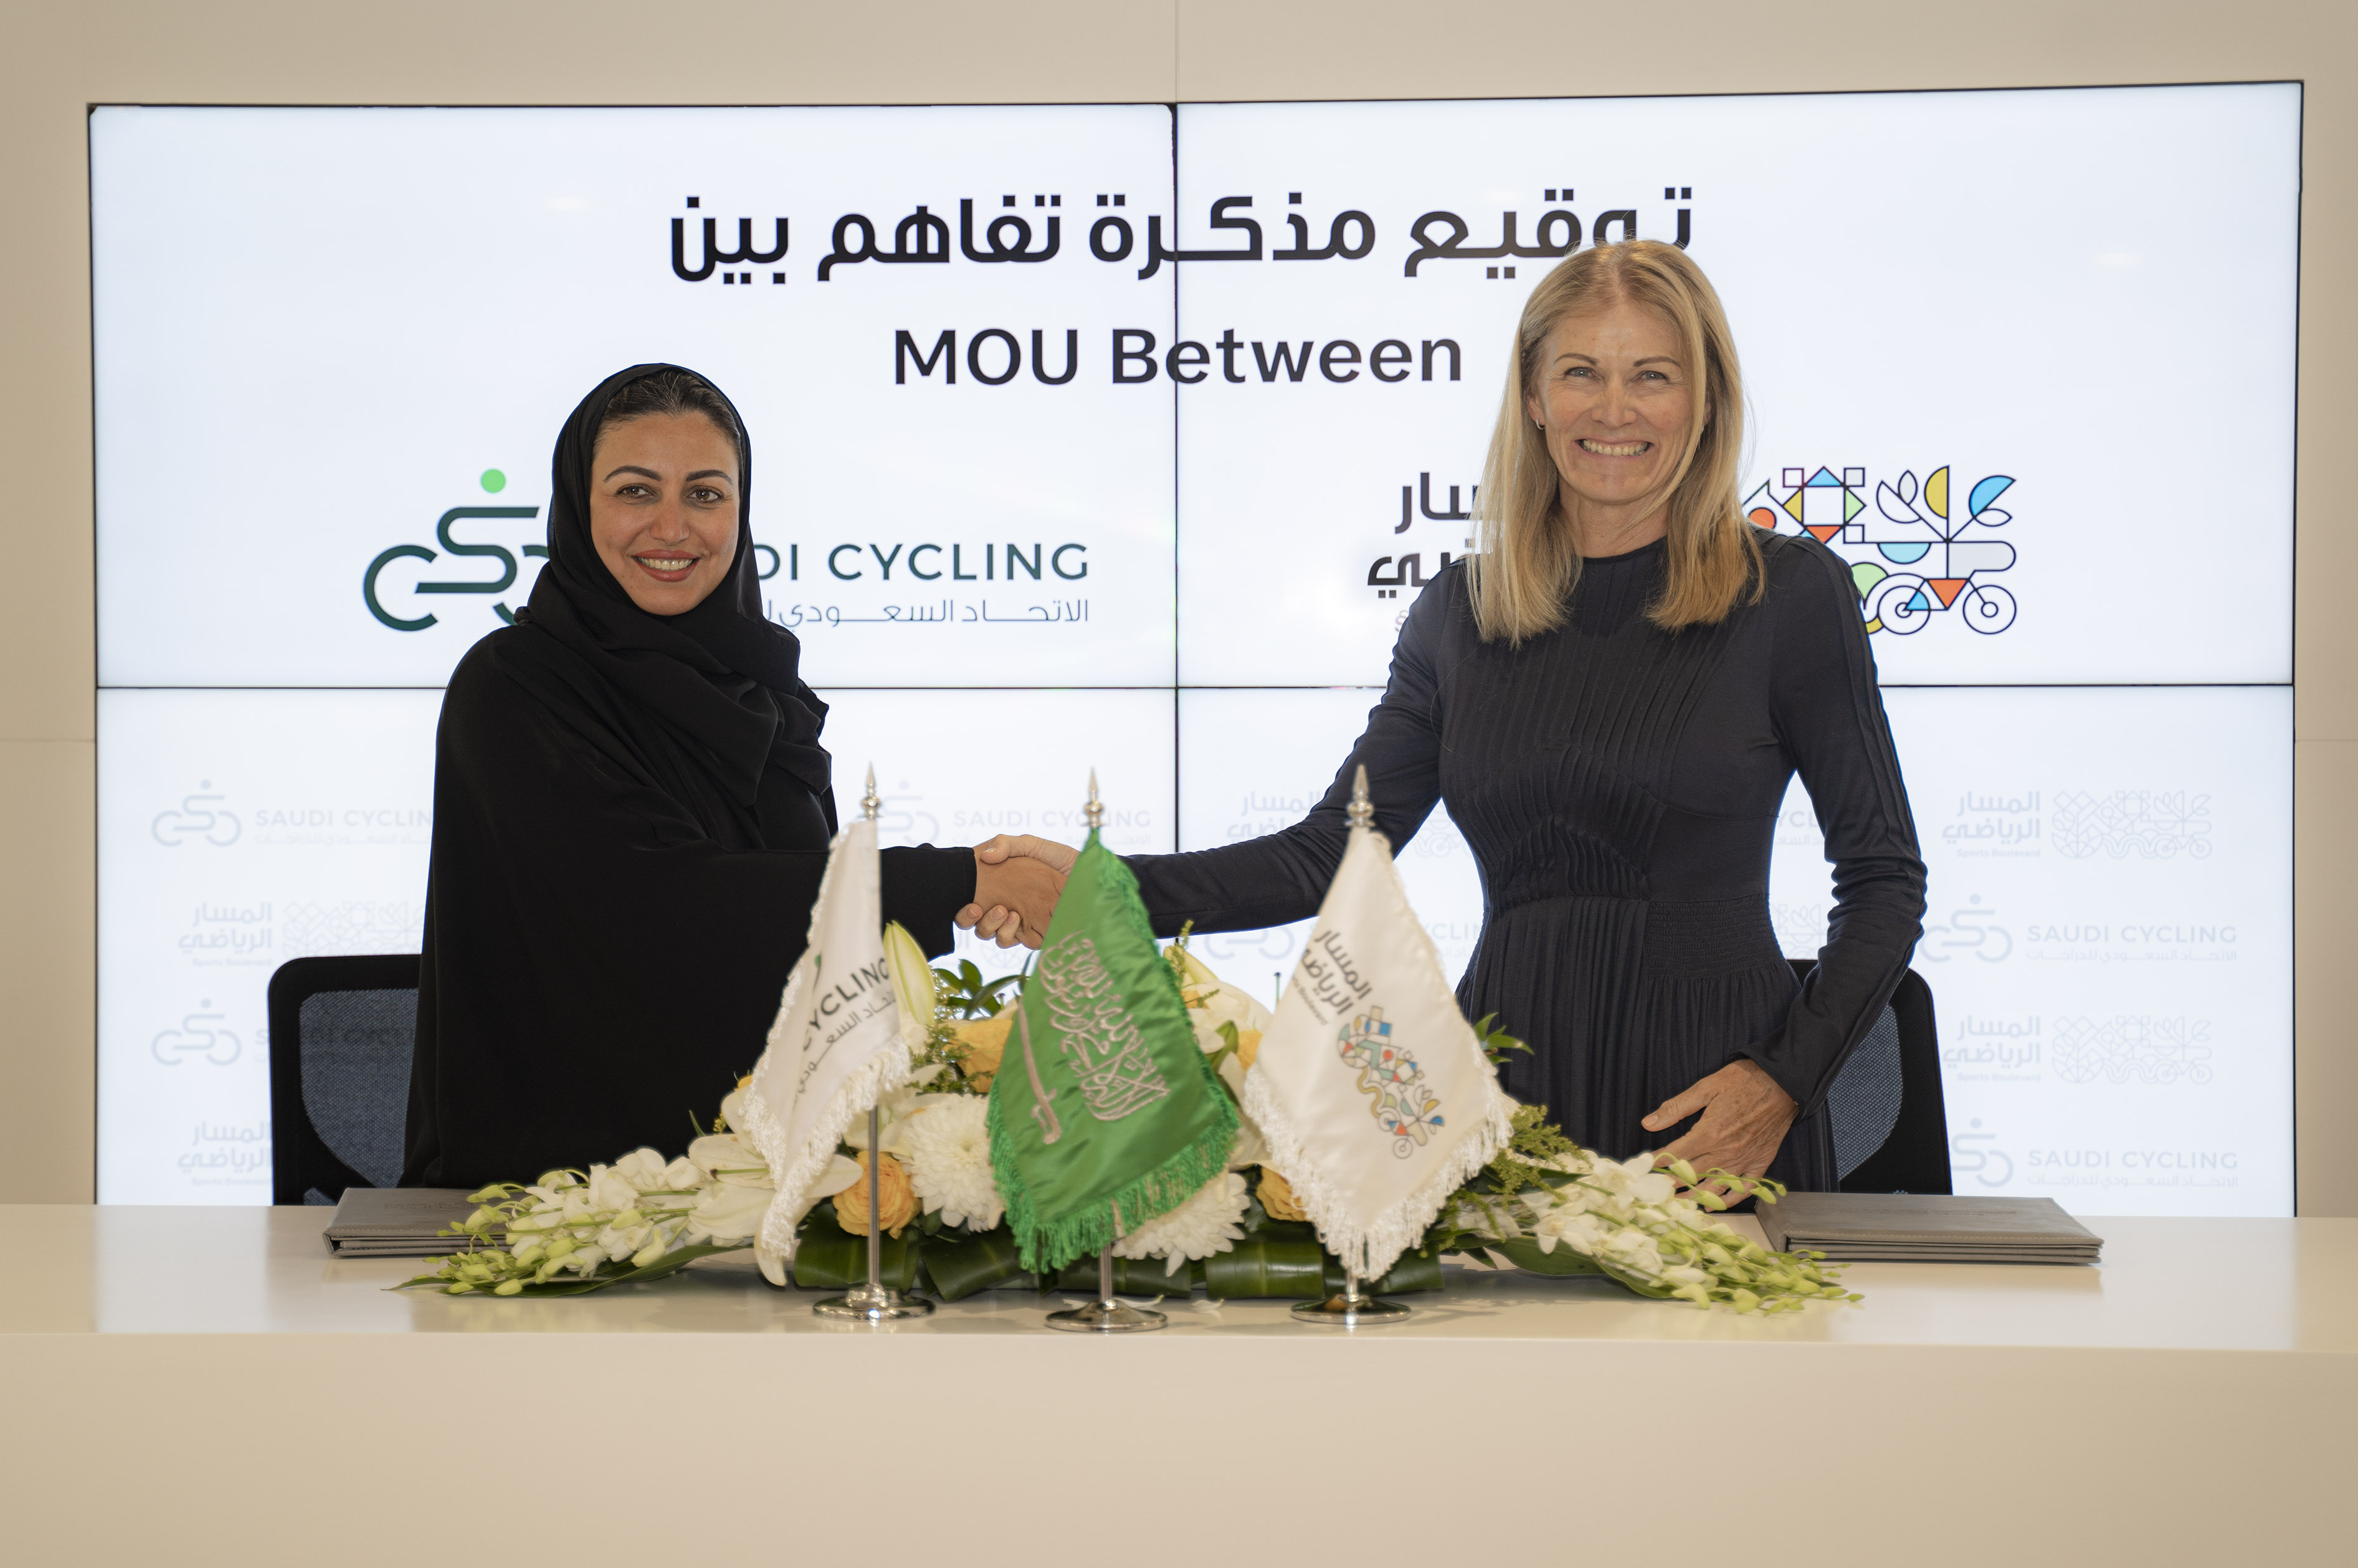 The Sports Boulevard Foundation signed a memorandum of understanding (MoU) with the Saudi Cycling Federation (SACF) to explore opportunities for